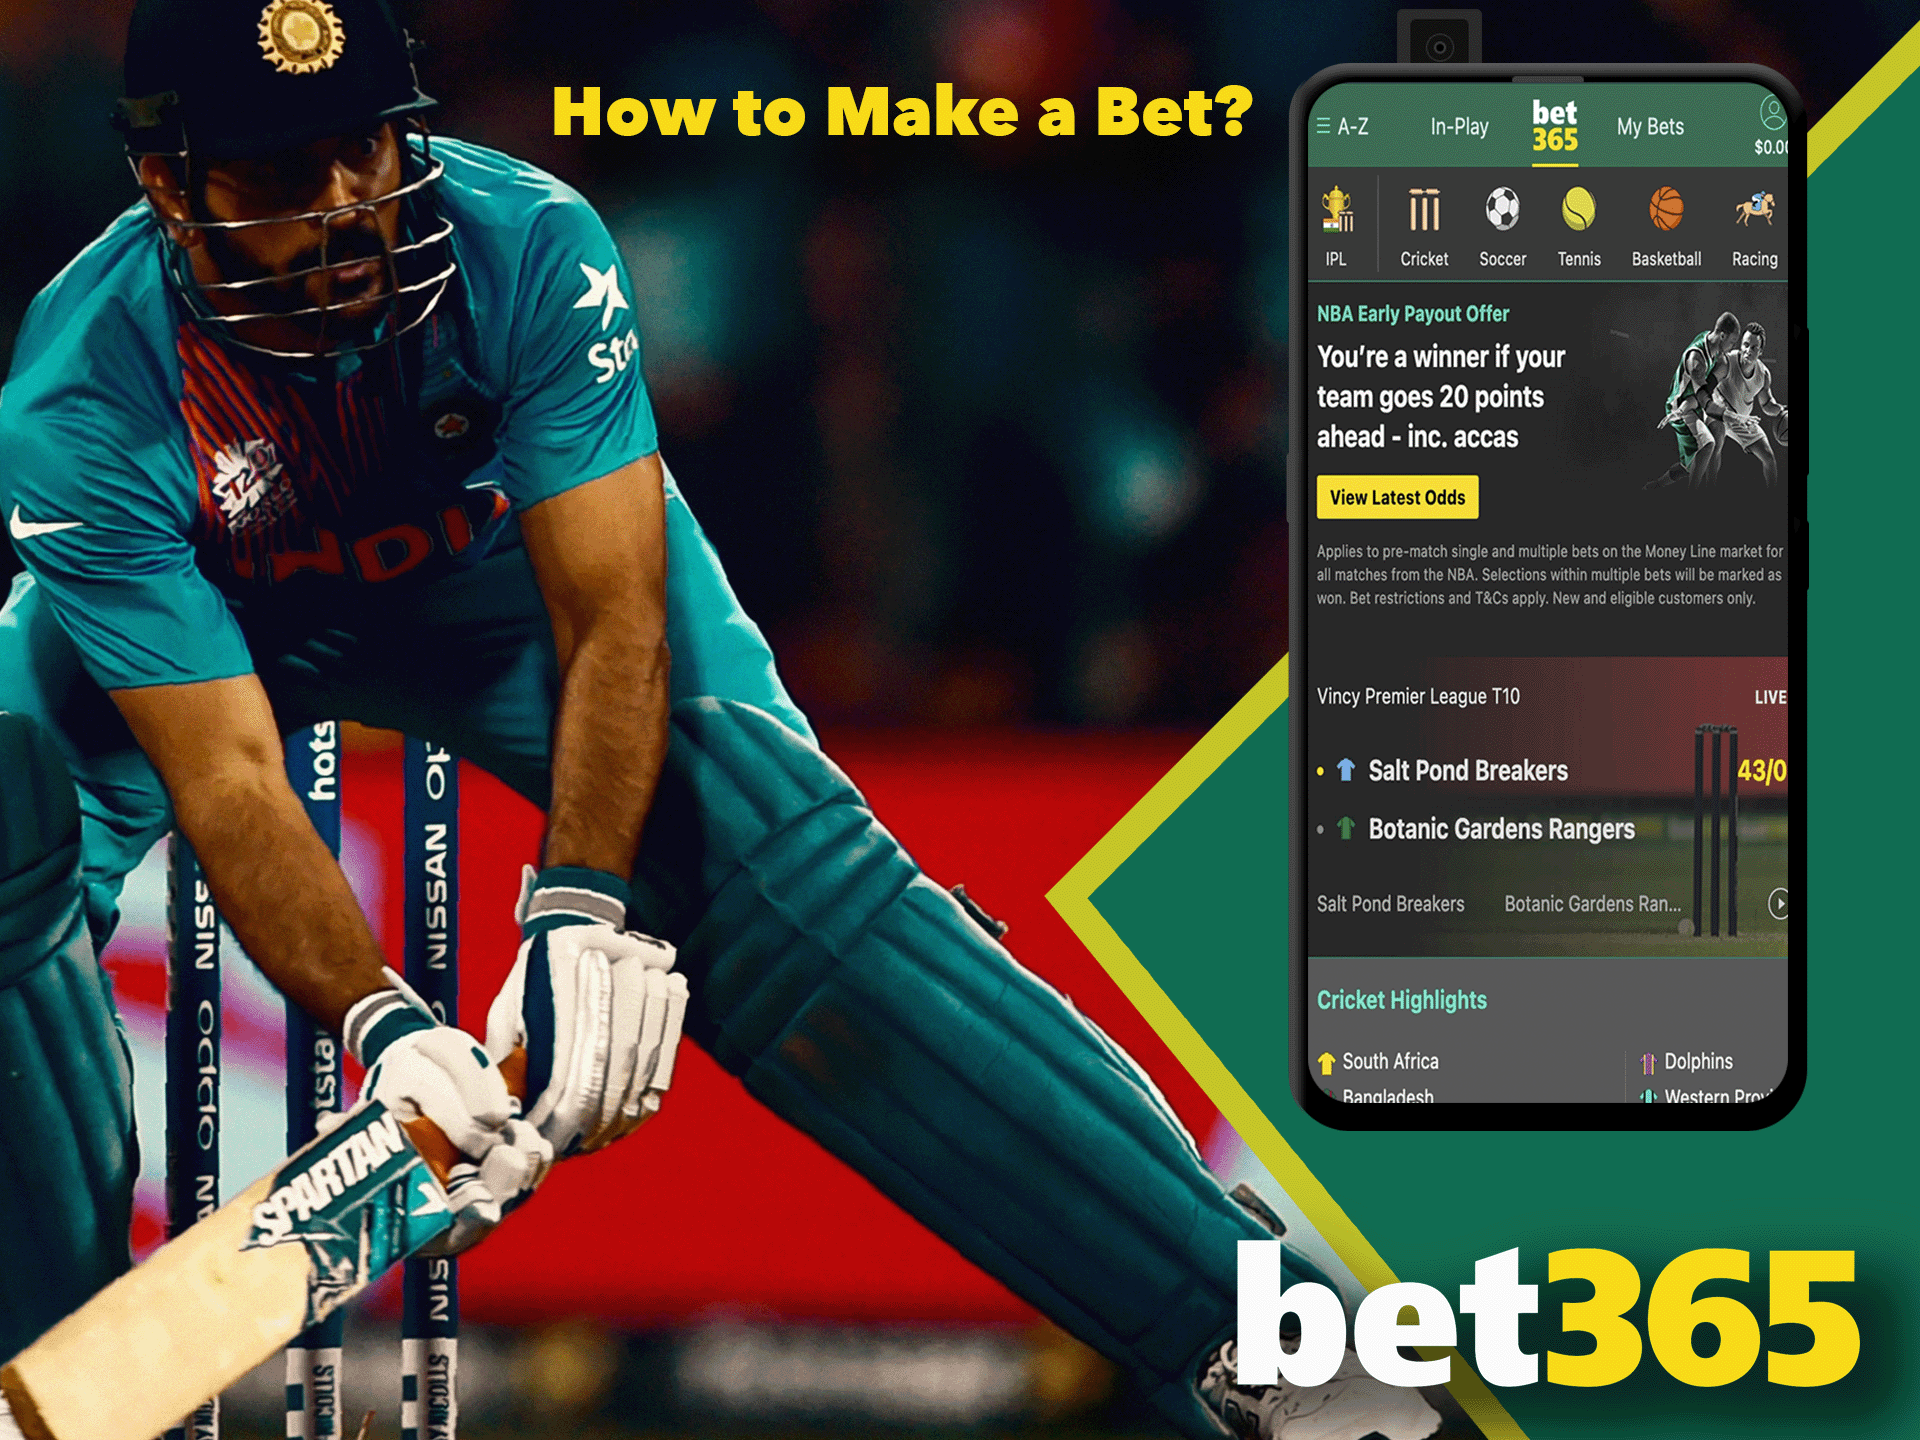 Our instruction will help you place a bet at Bet365 app.